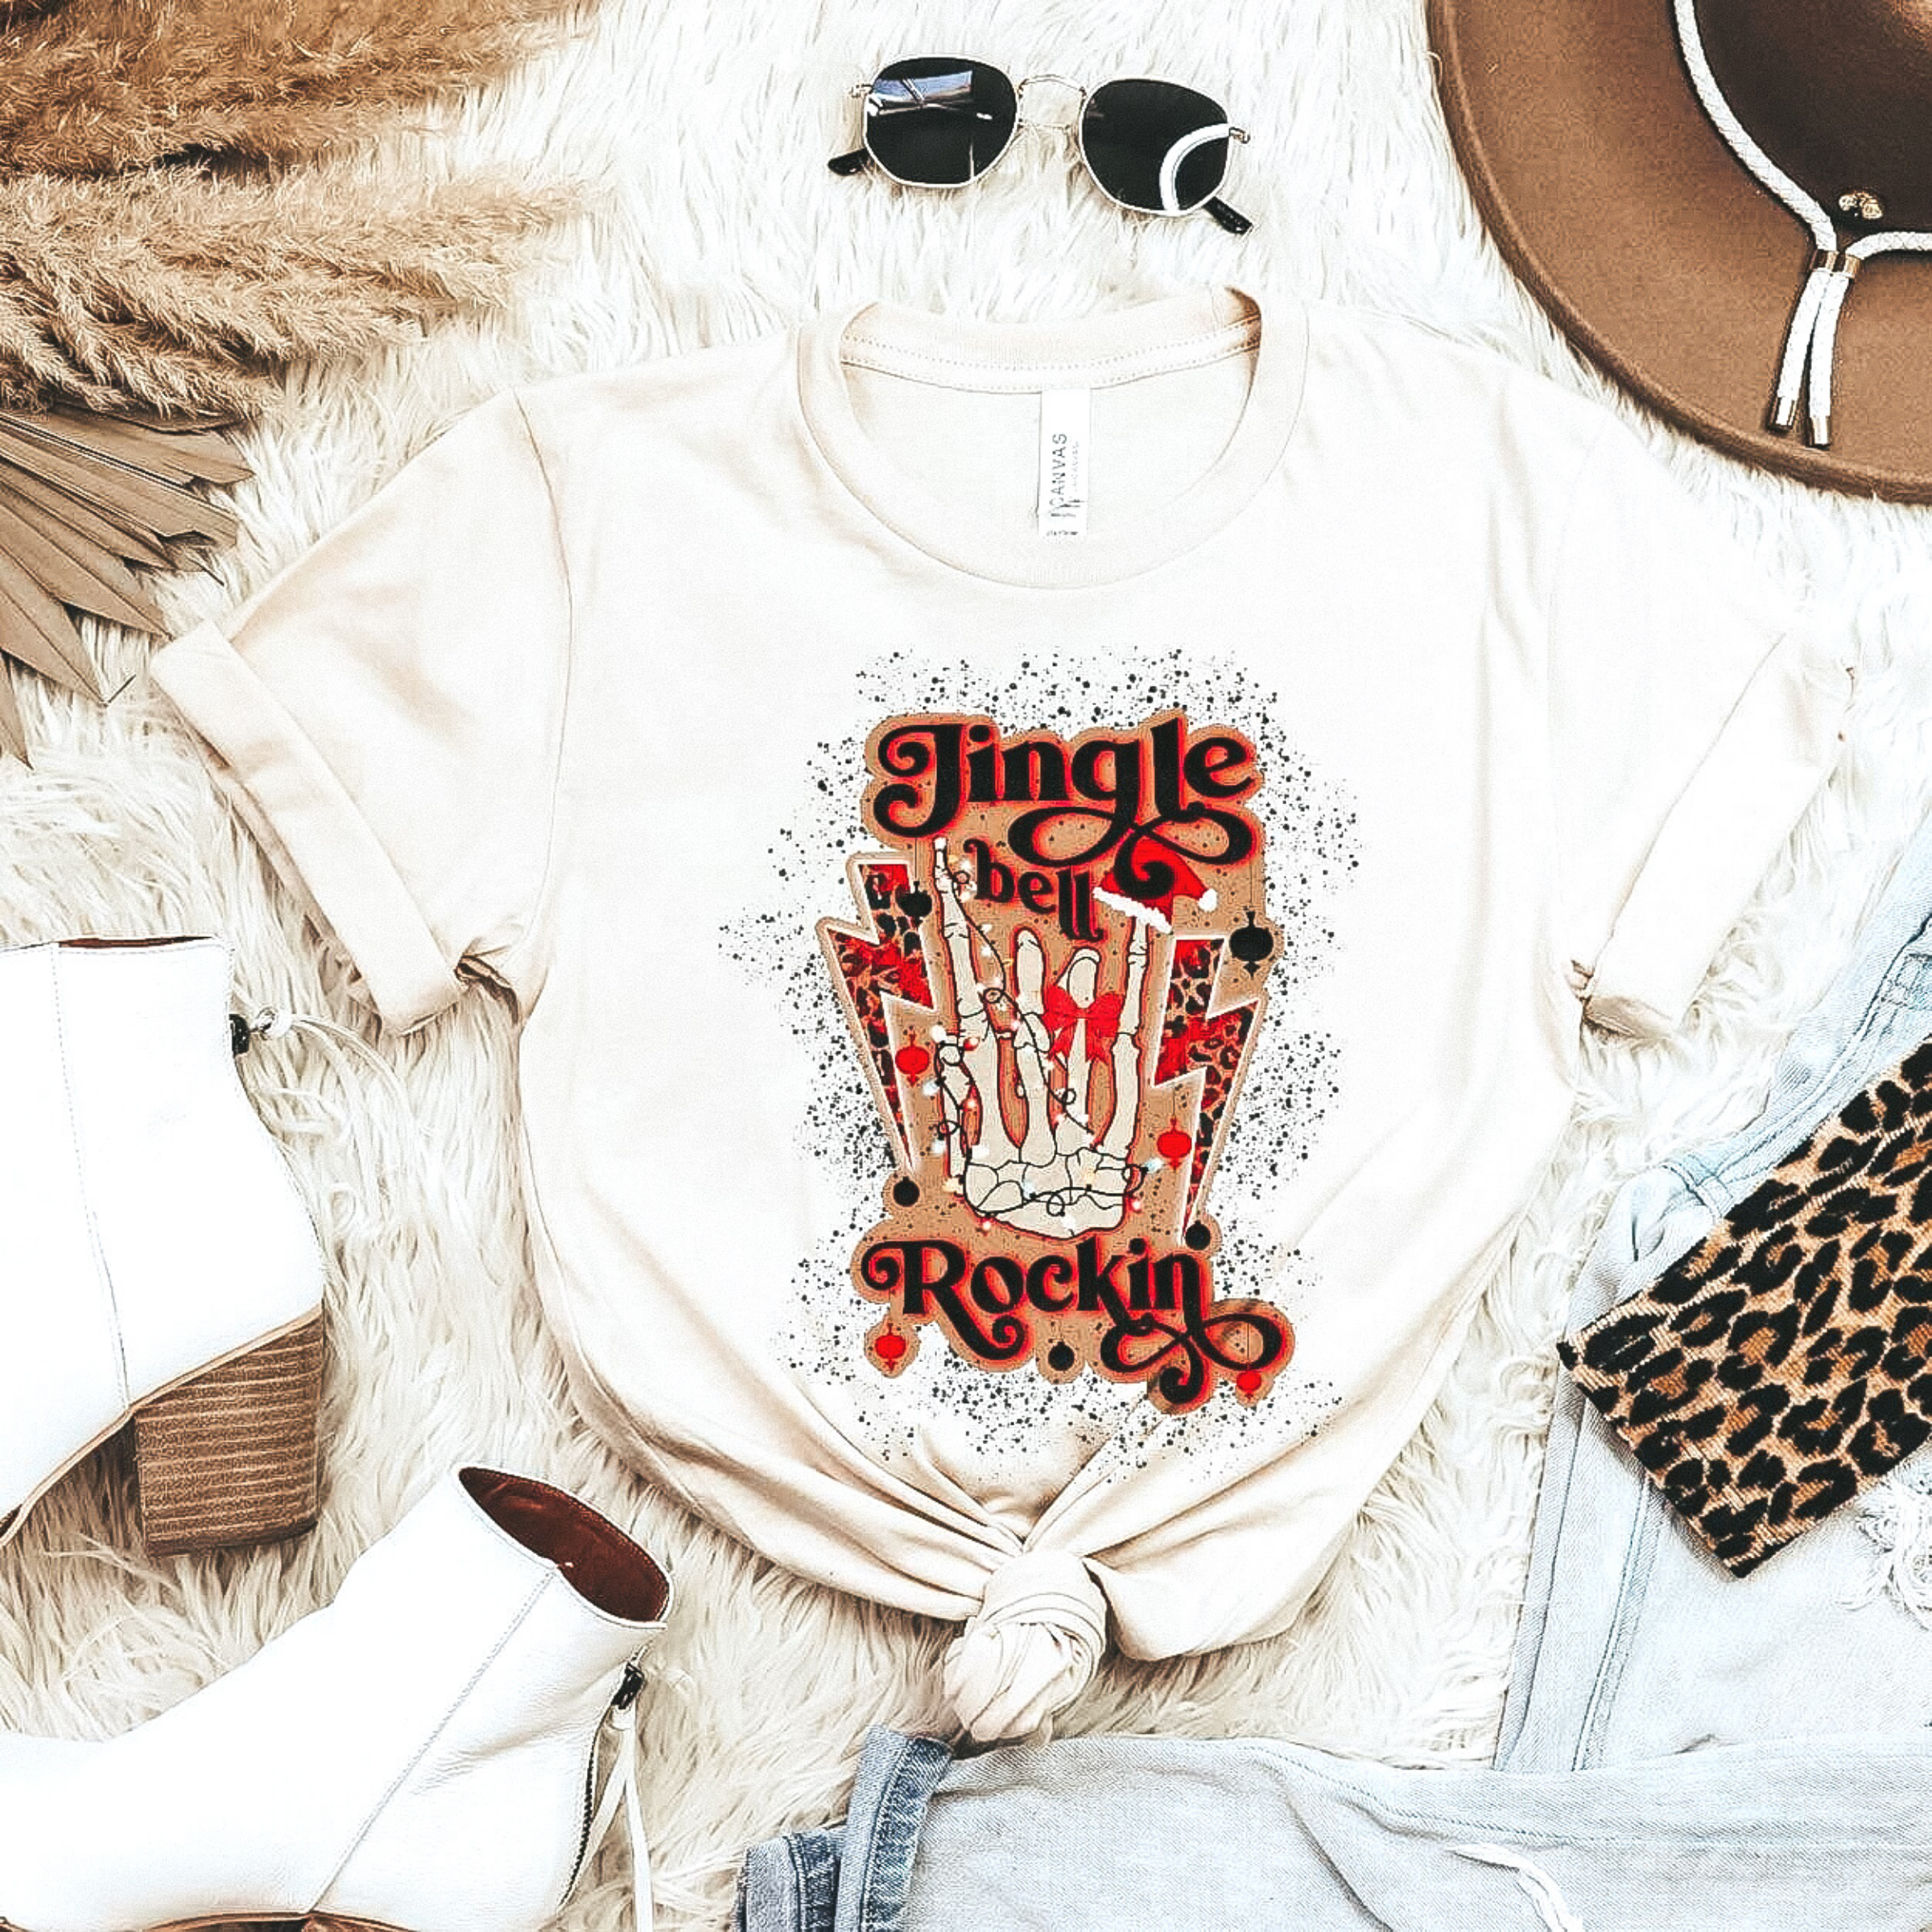 A cream colored crew neck tee with a skeleton hand making the rocker symbol that says "Jingle Bell Rockin'." Pictured with white booties, sunglasses, and a brown hat.